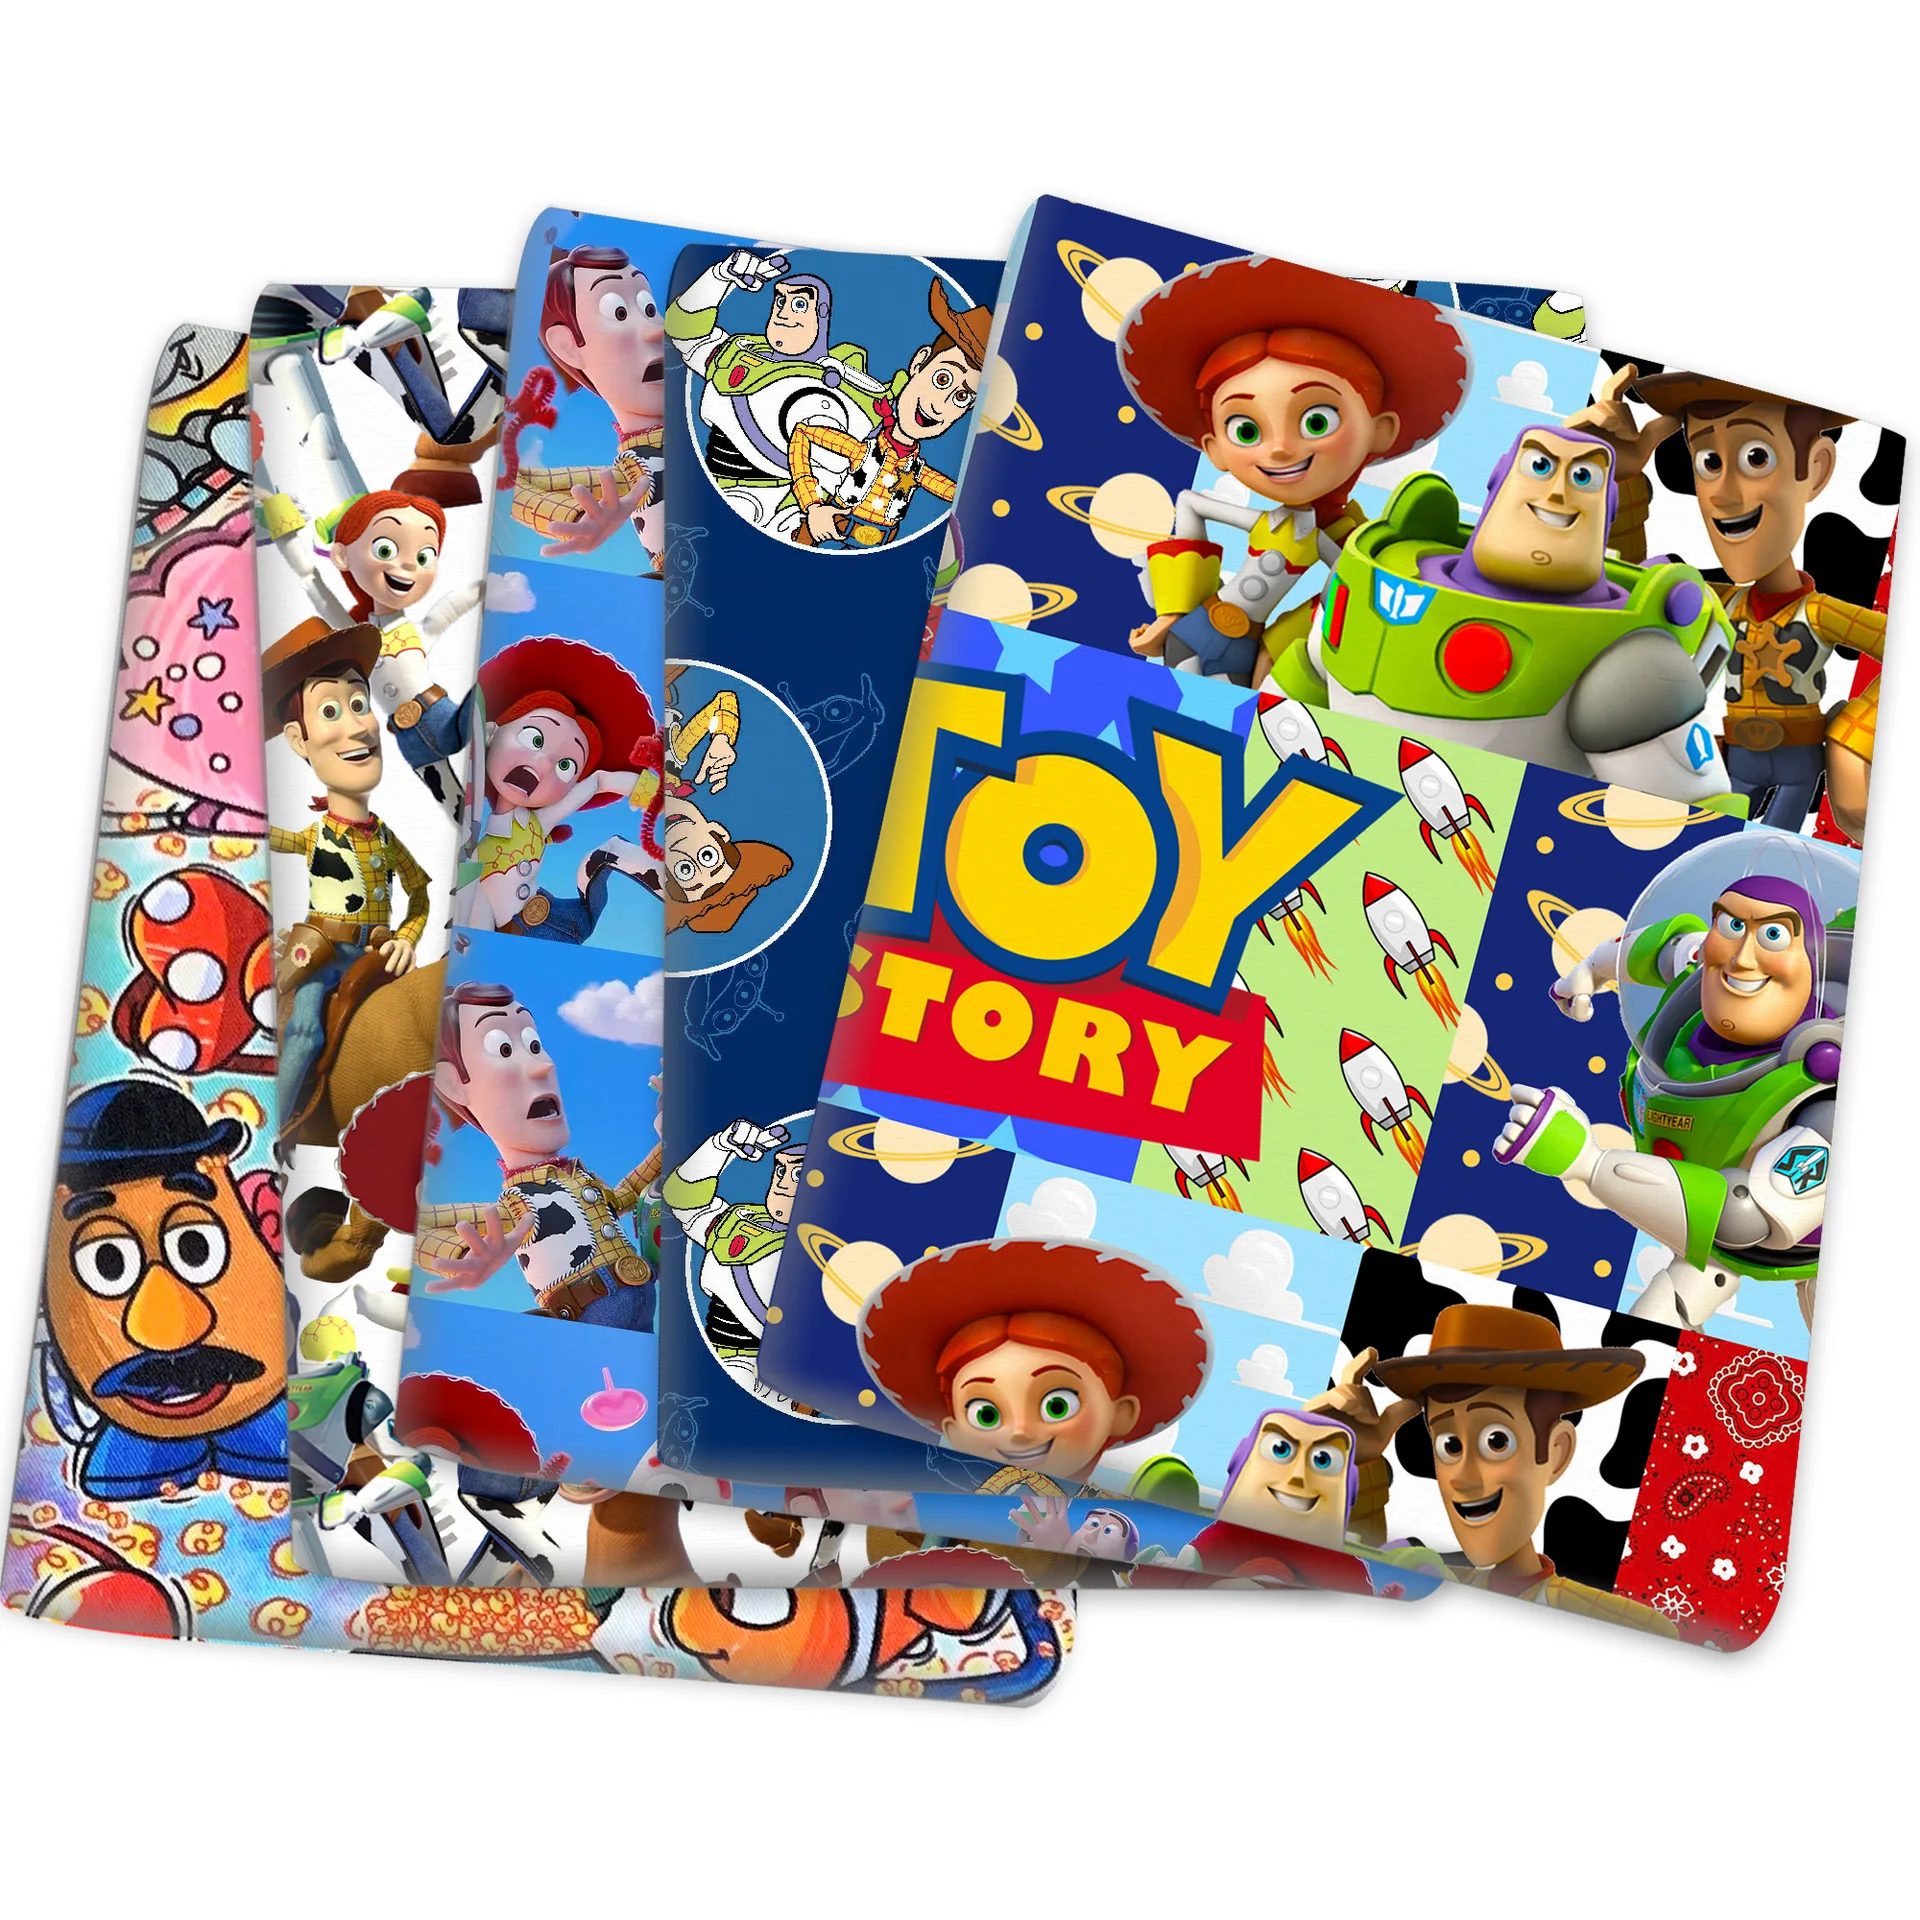 Sale Polyester Cotton Toy Story Disney Fabric For Sew Slipcover Clothes Dress Decor DIY Patchwork Quilting Needlework Material